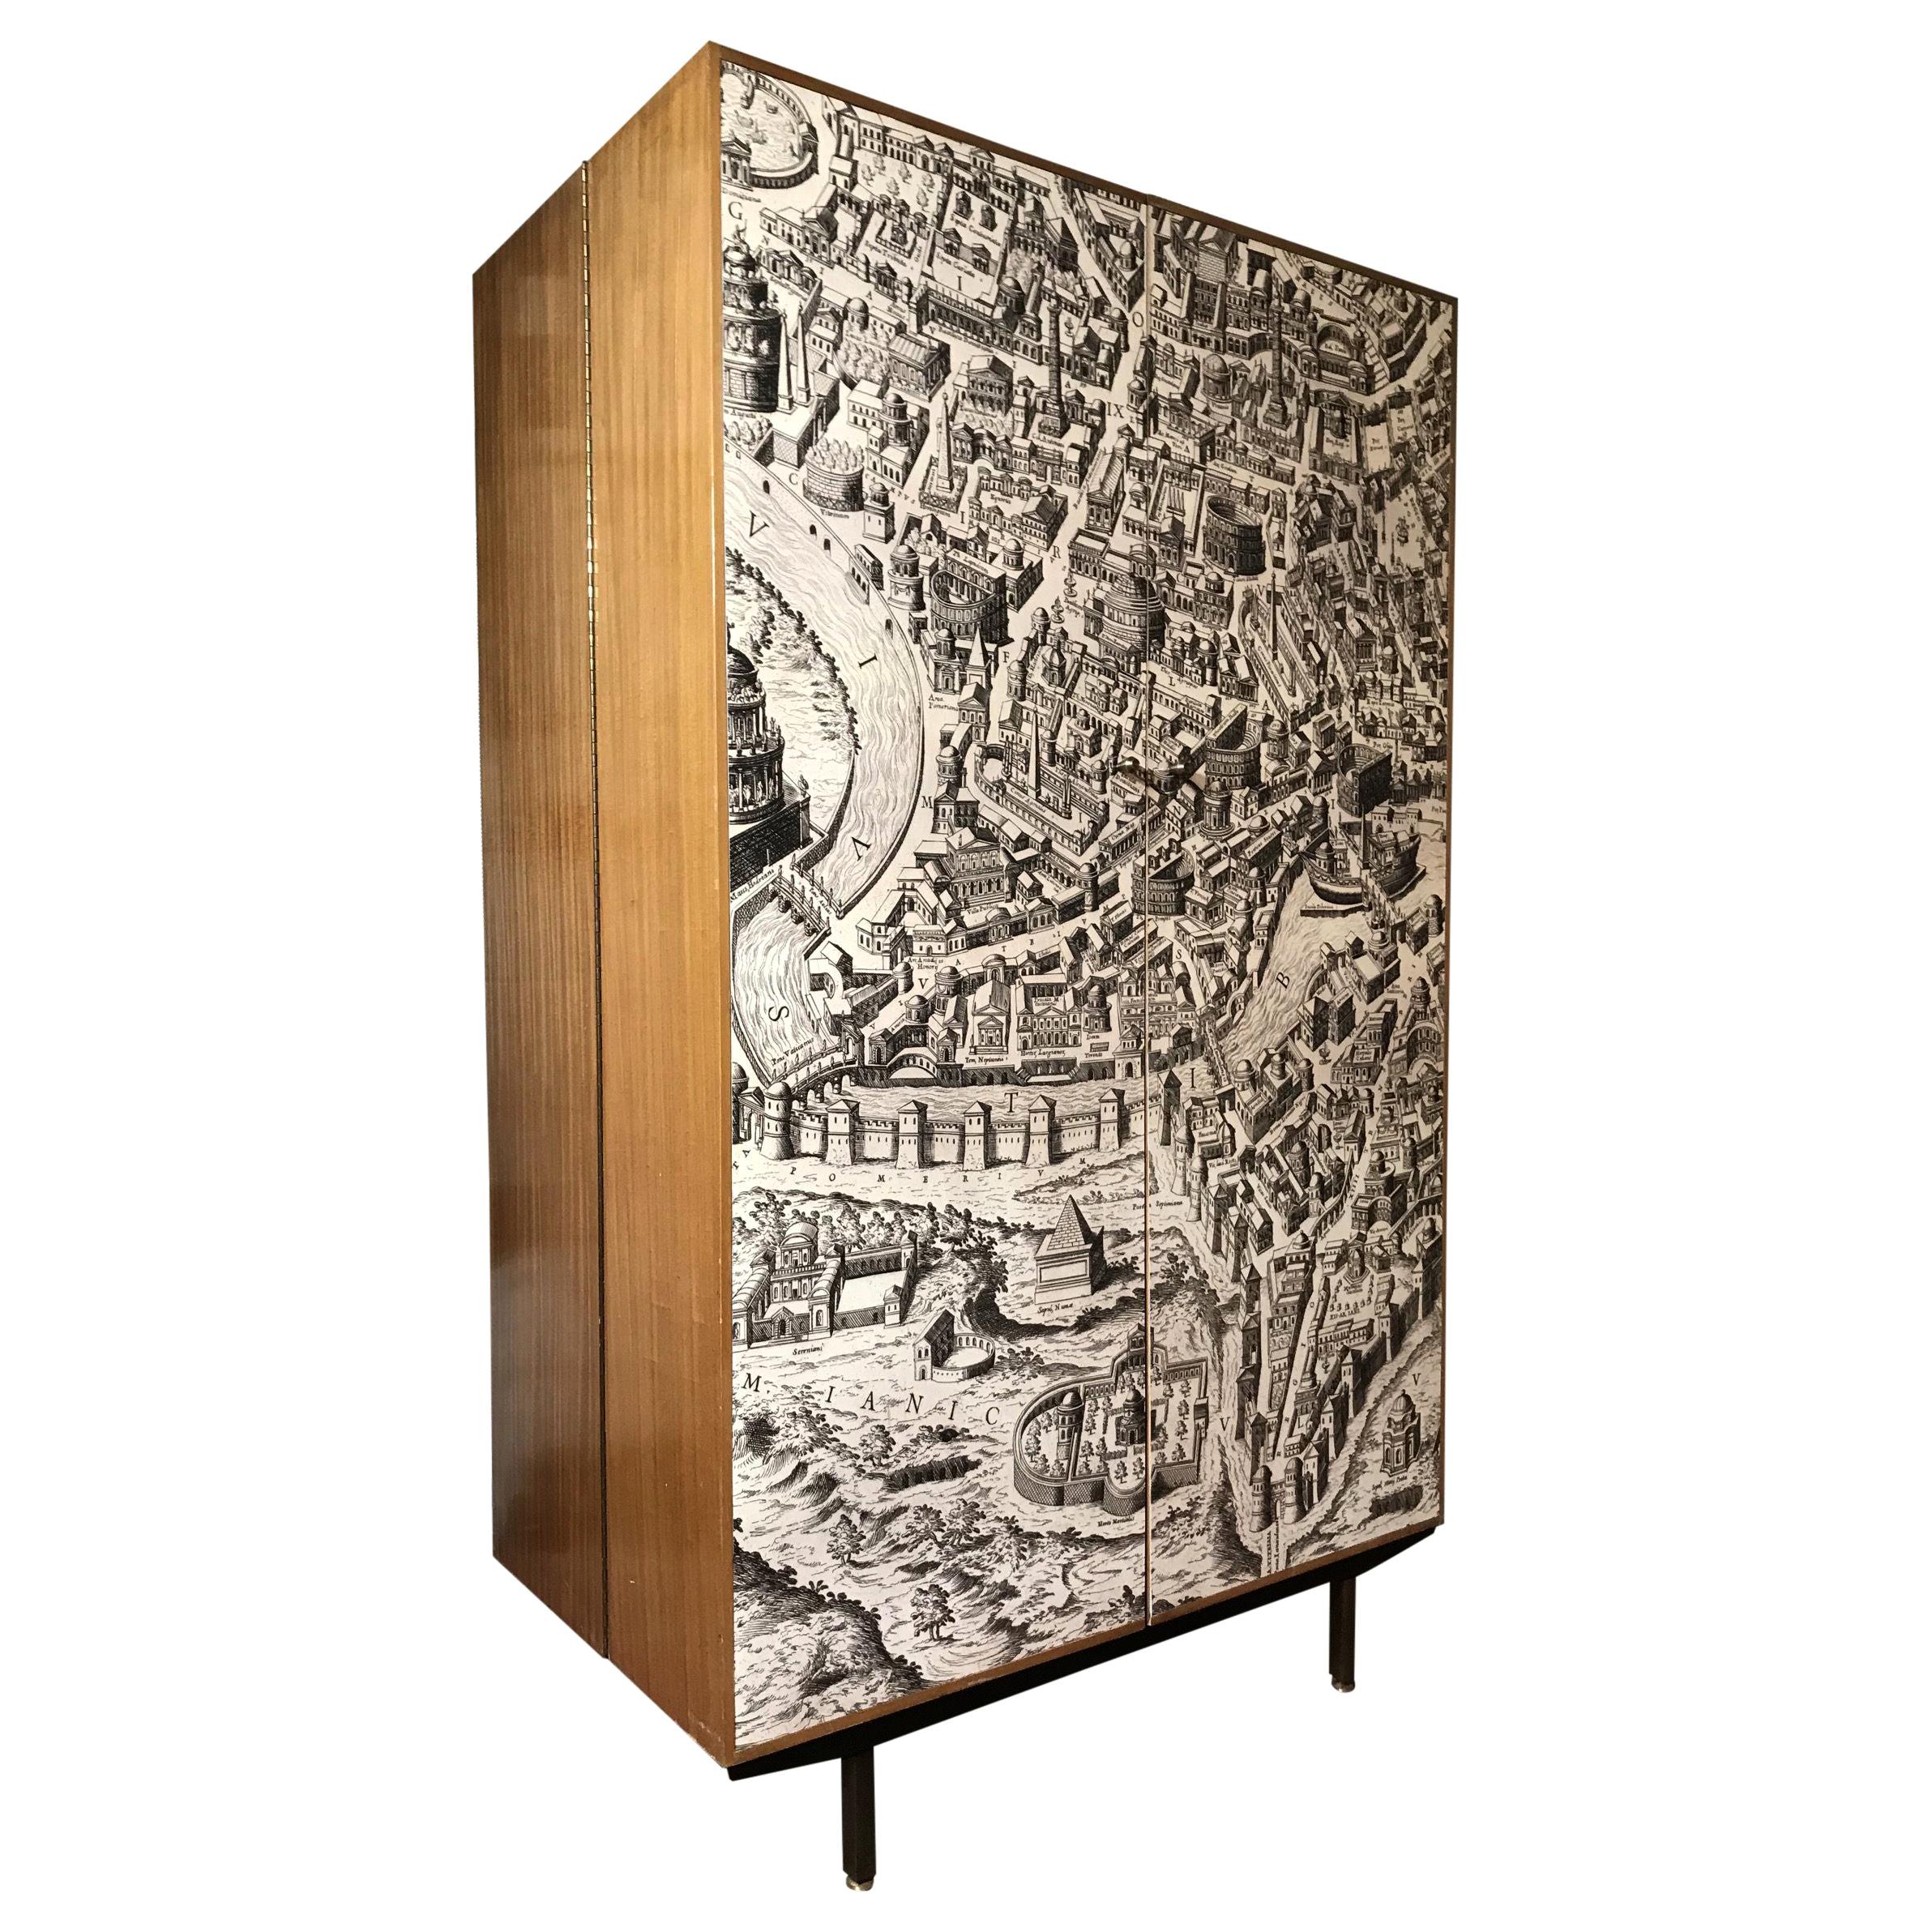 Vintage Armoire Compactium Engraving of Ancient Rome on Formica Panels, 1950s